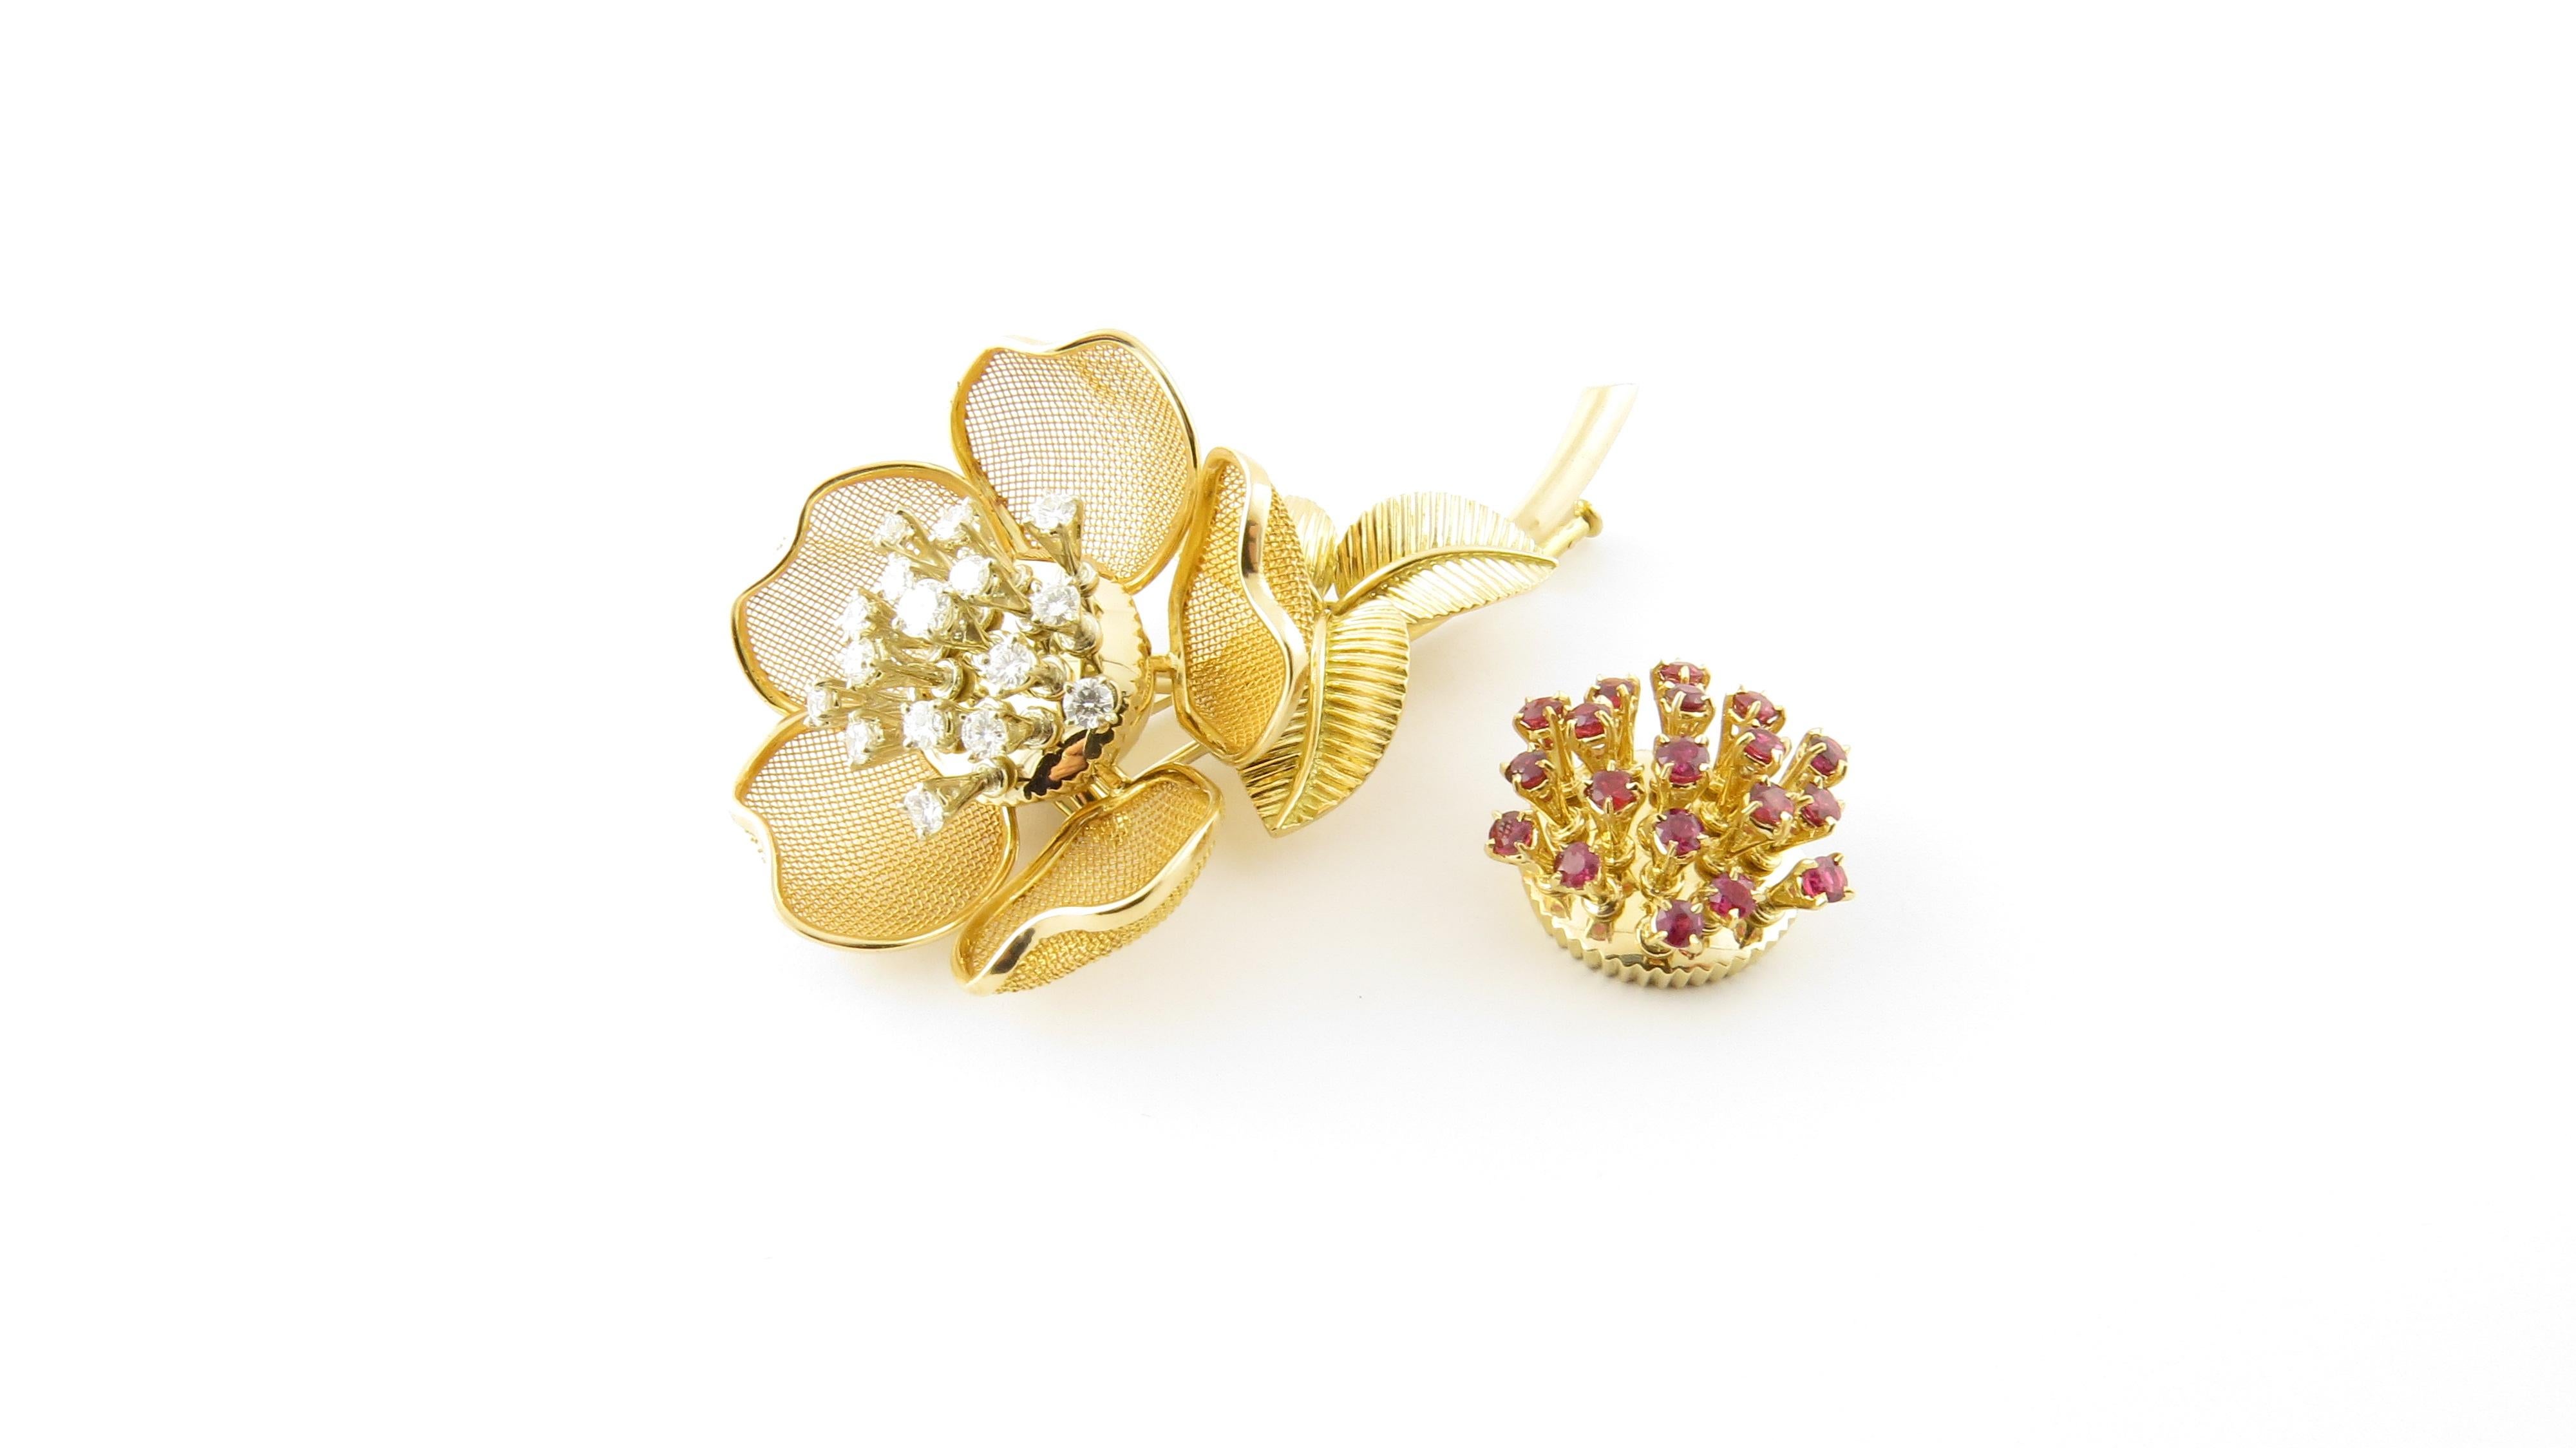 Piaget 18K Yellow Gold Diamond and Ruby Tremblant Flower Brooch
This gorgeous brooch is approx. 2.5